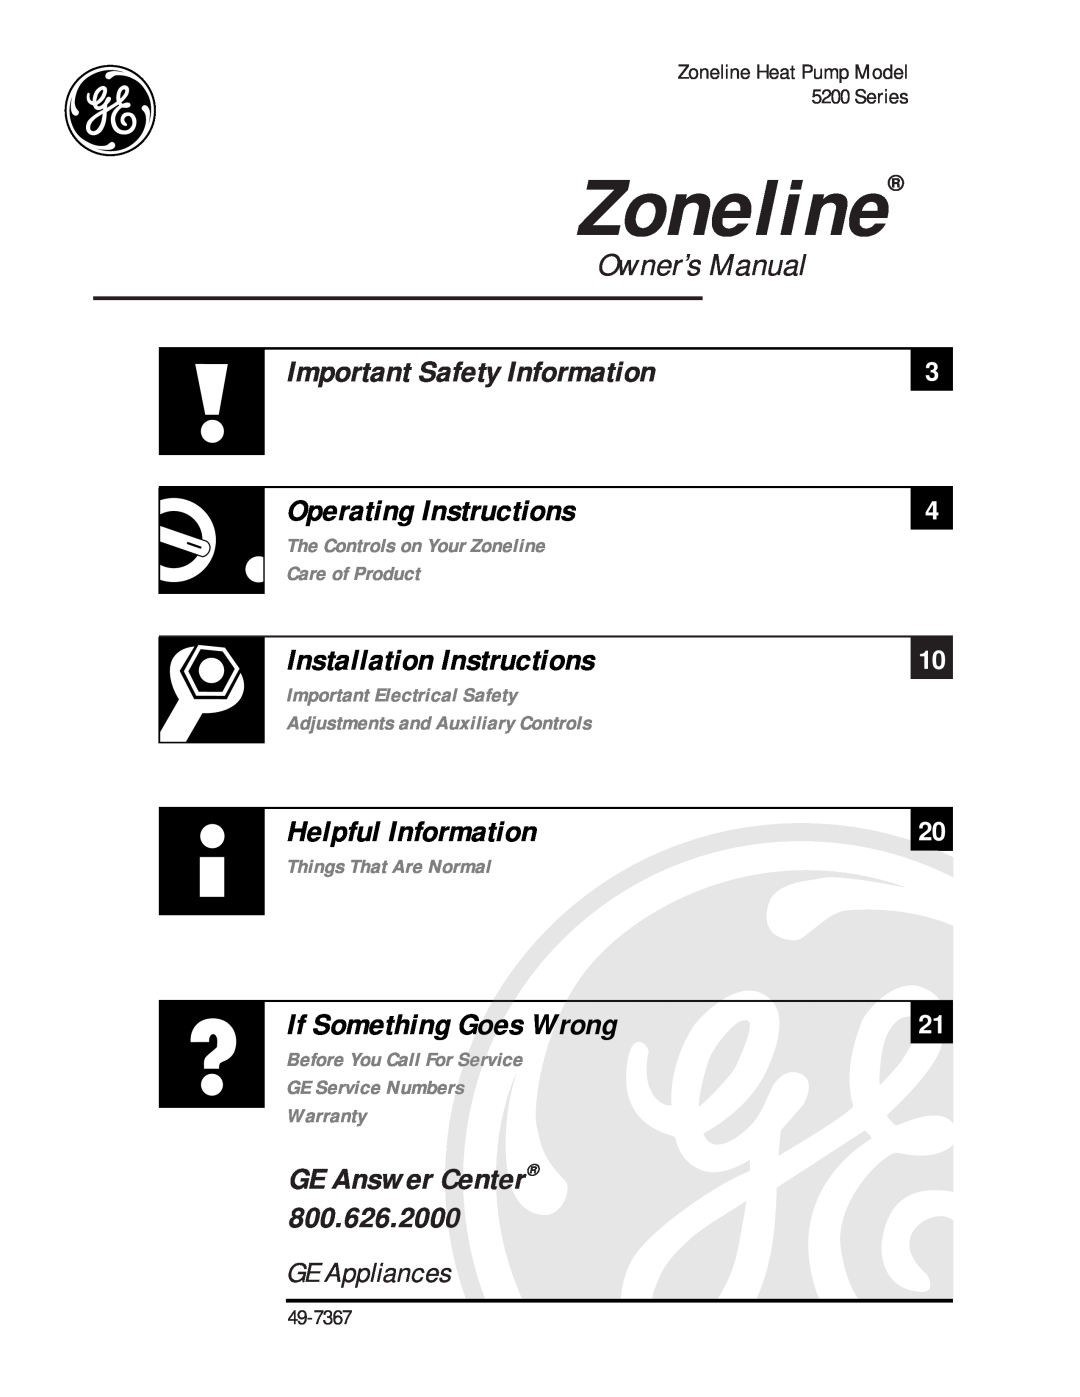 GE 5200 installation instructions GE Answer Center, Zoneline, Important Safety Information, Operating Instructions 